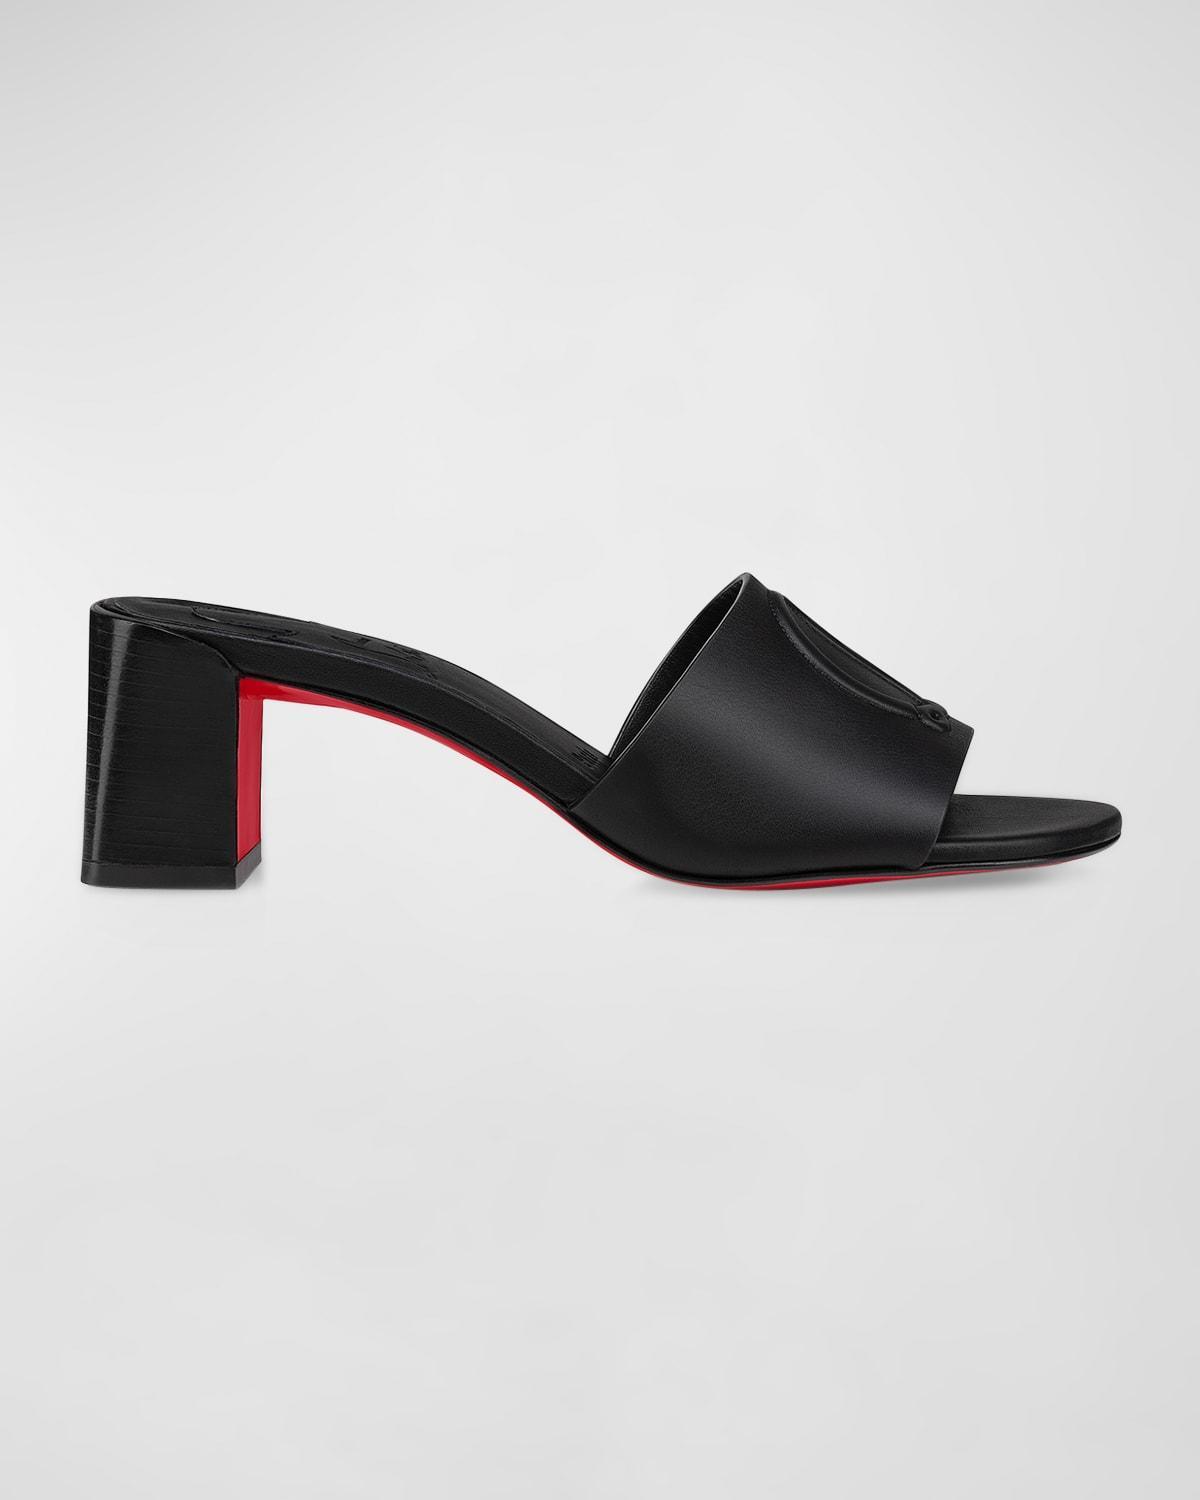 Leather Logo Red Sole Mule Sandals Product Image